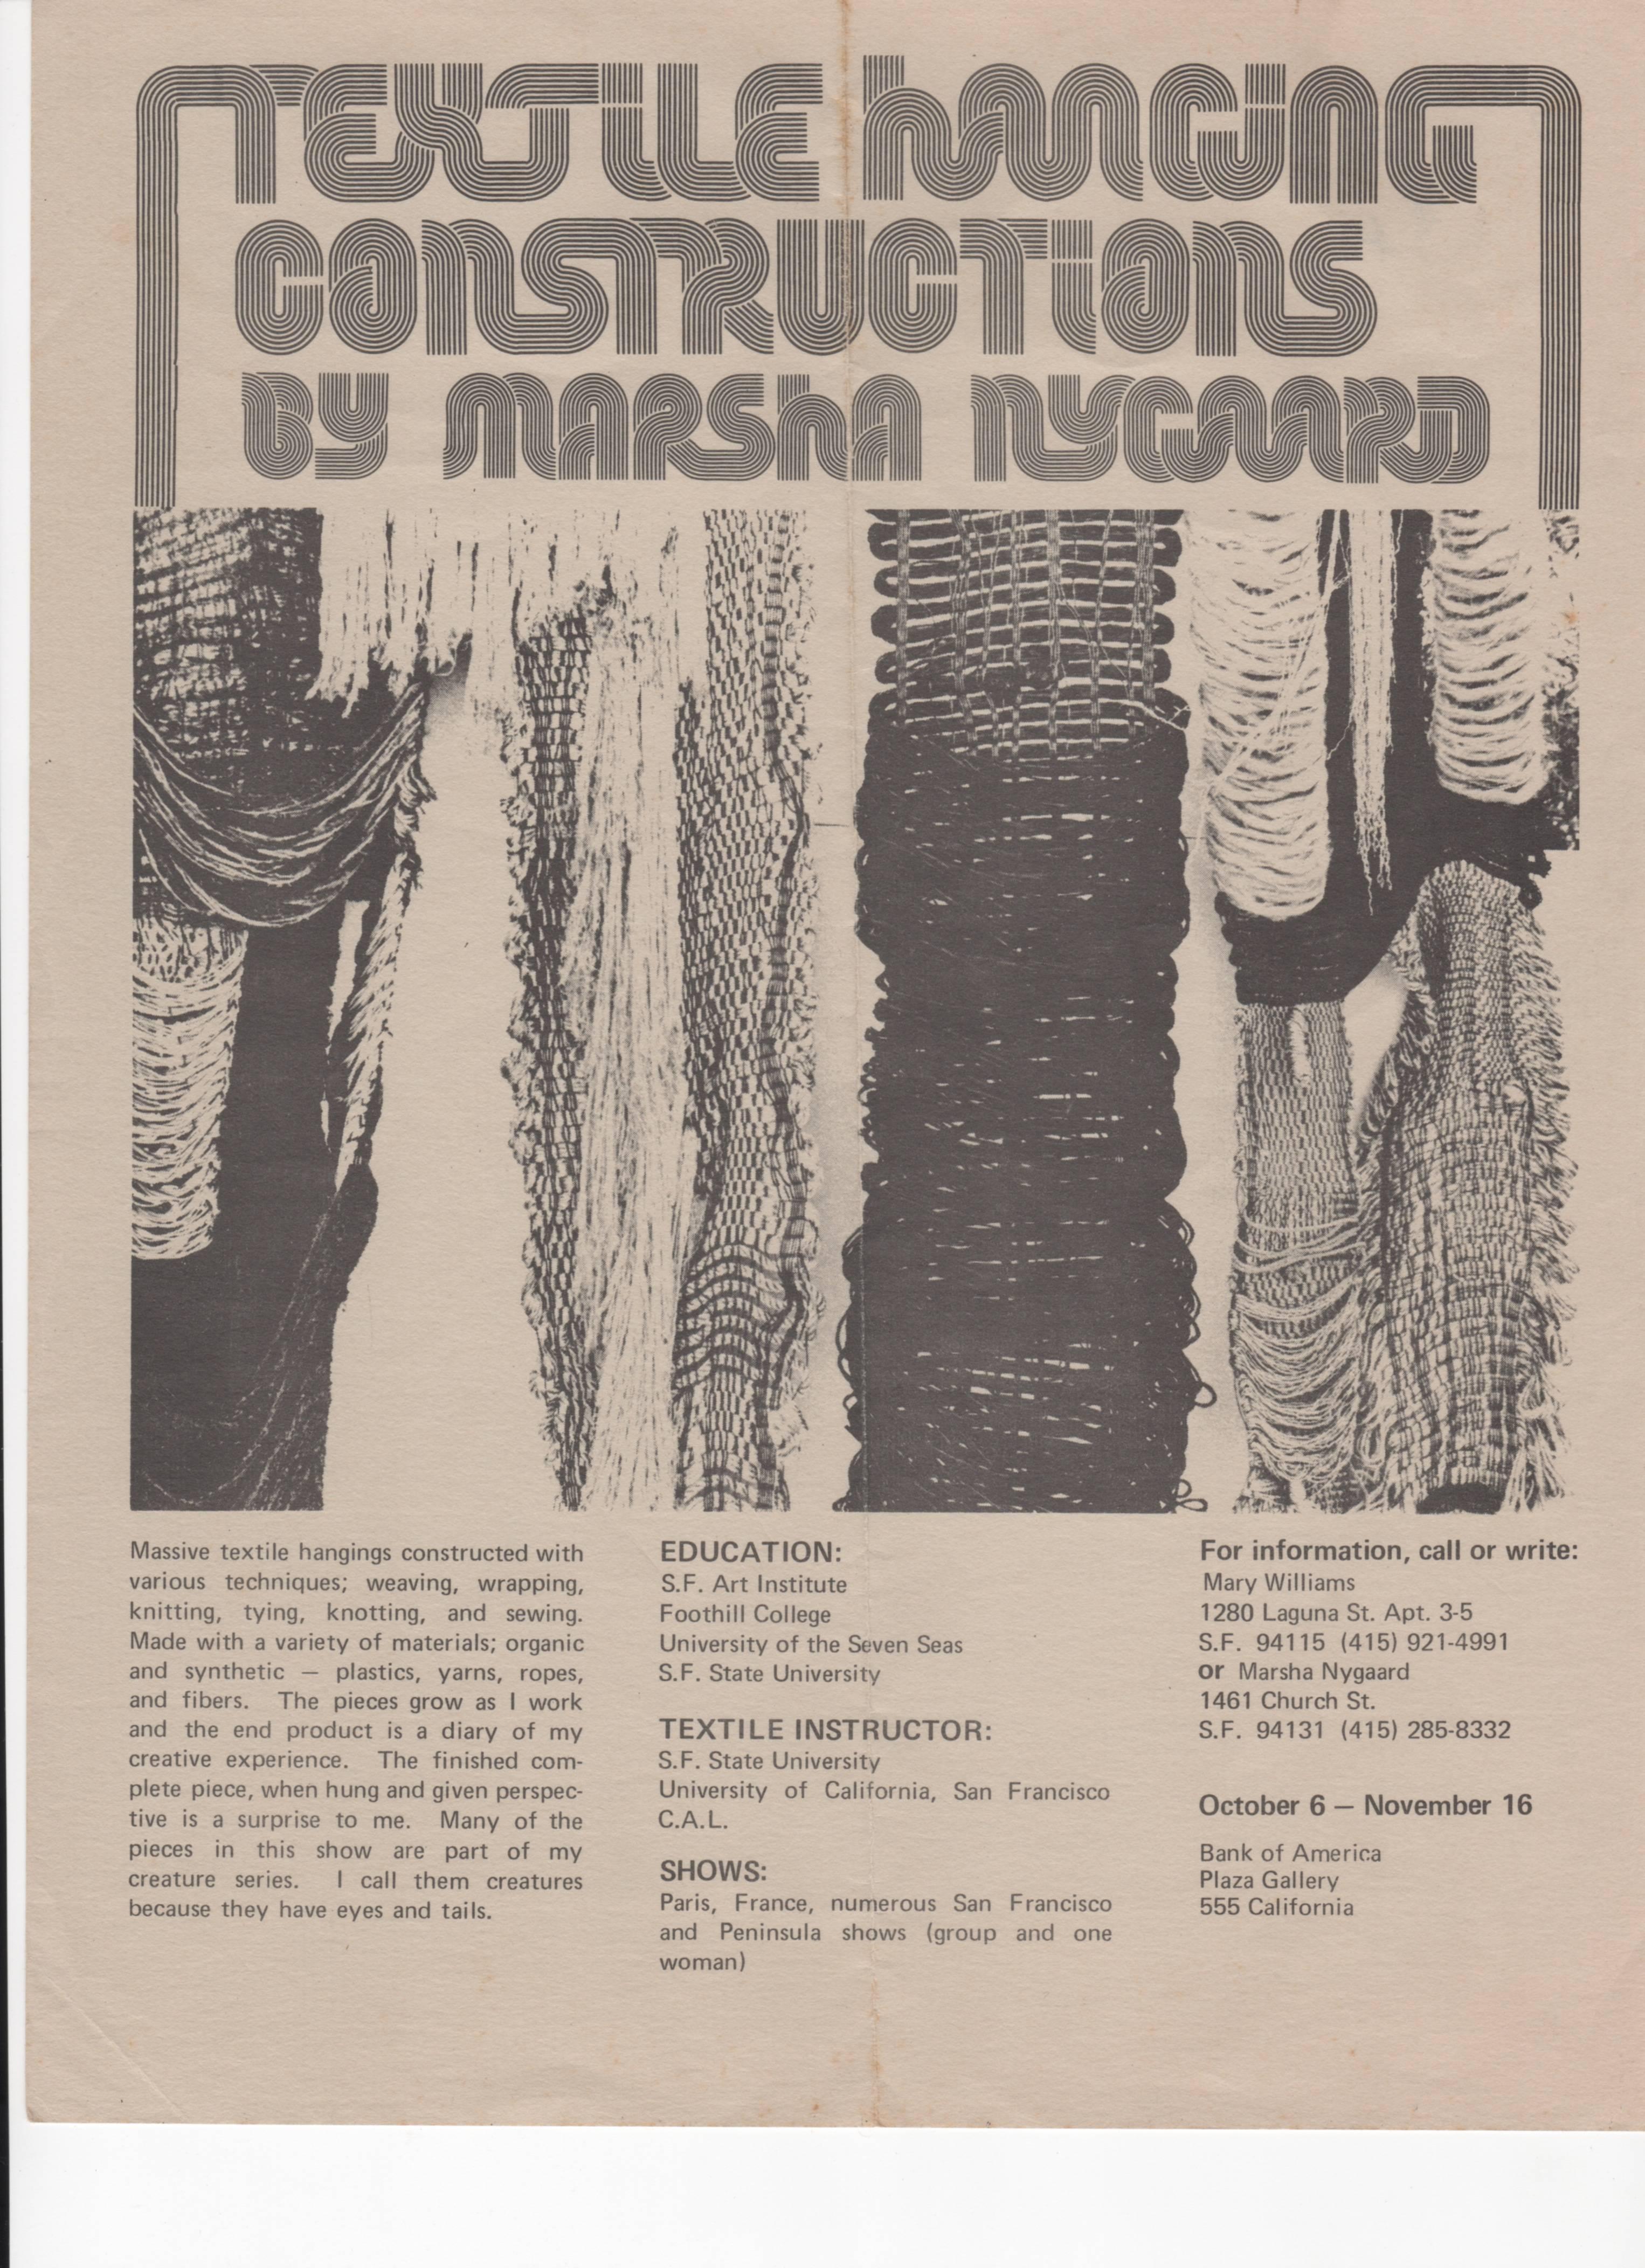 American Textile Hanging by Marsha Nygaard, 1973 = MOVING SALE!!!!!!